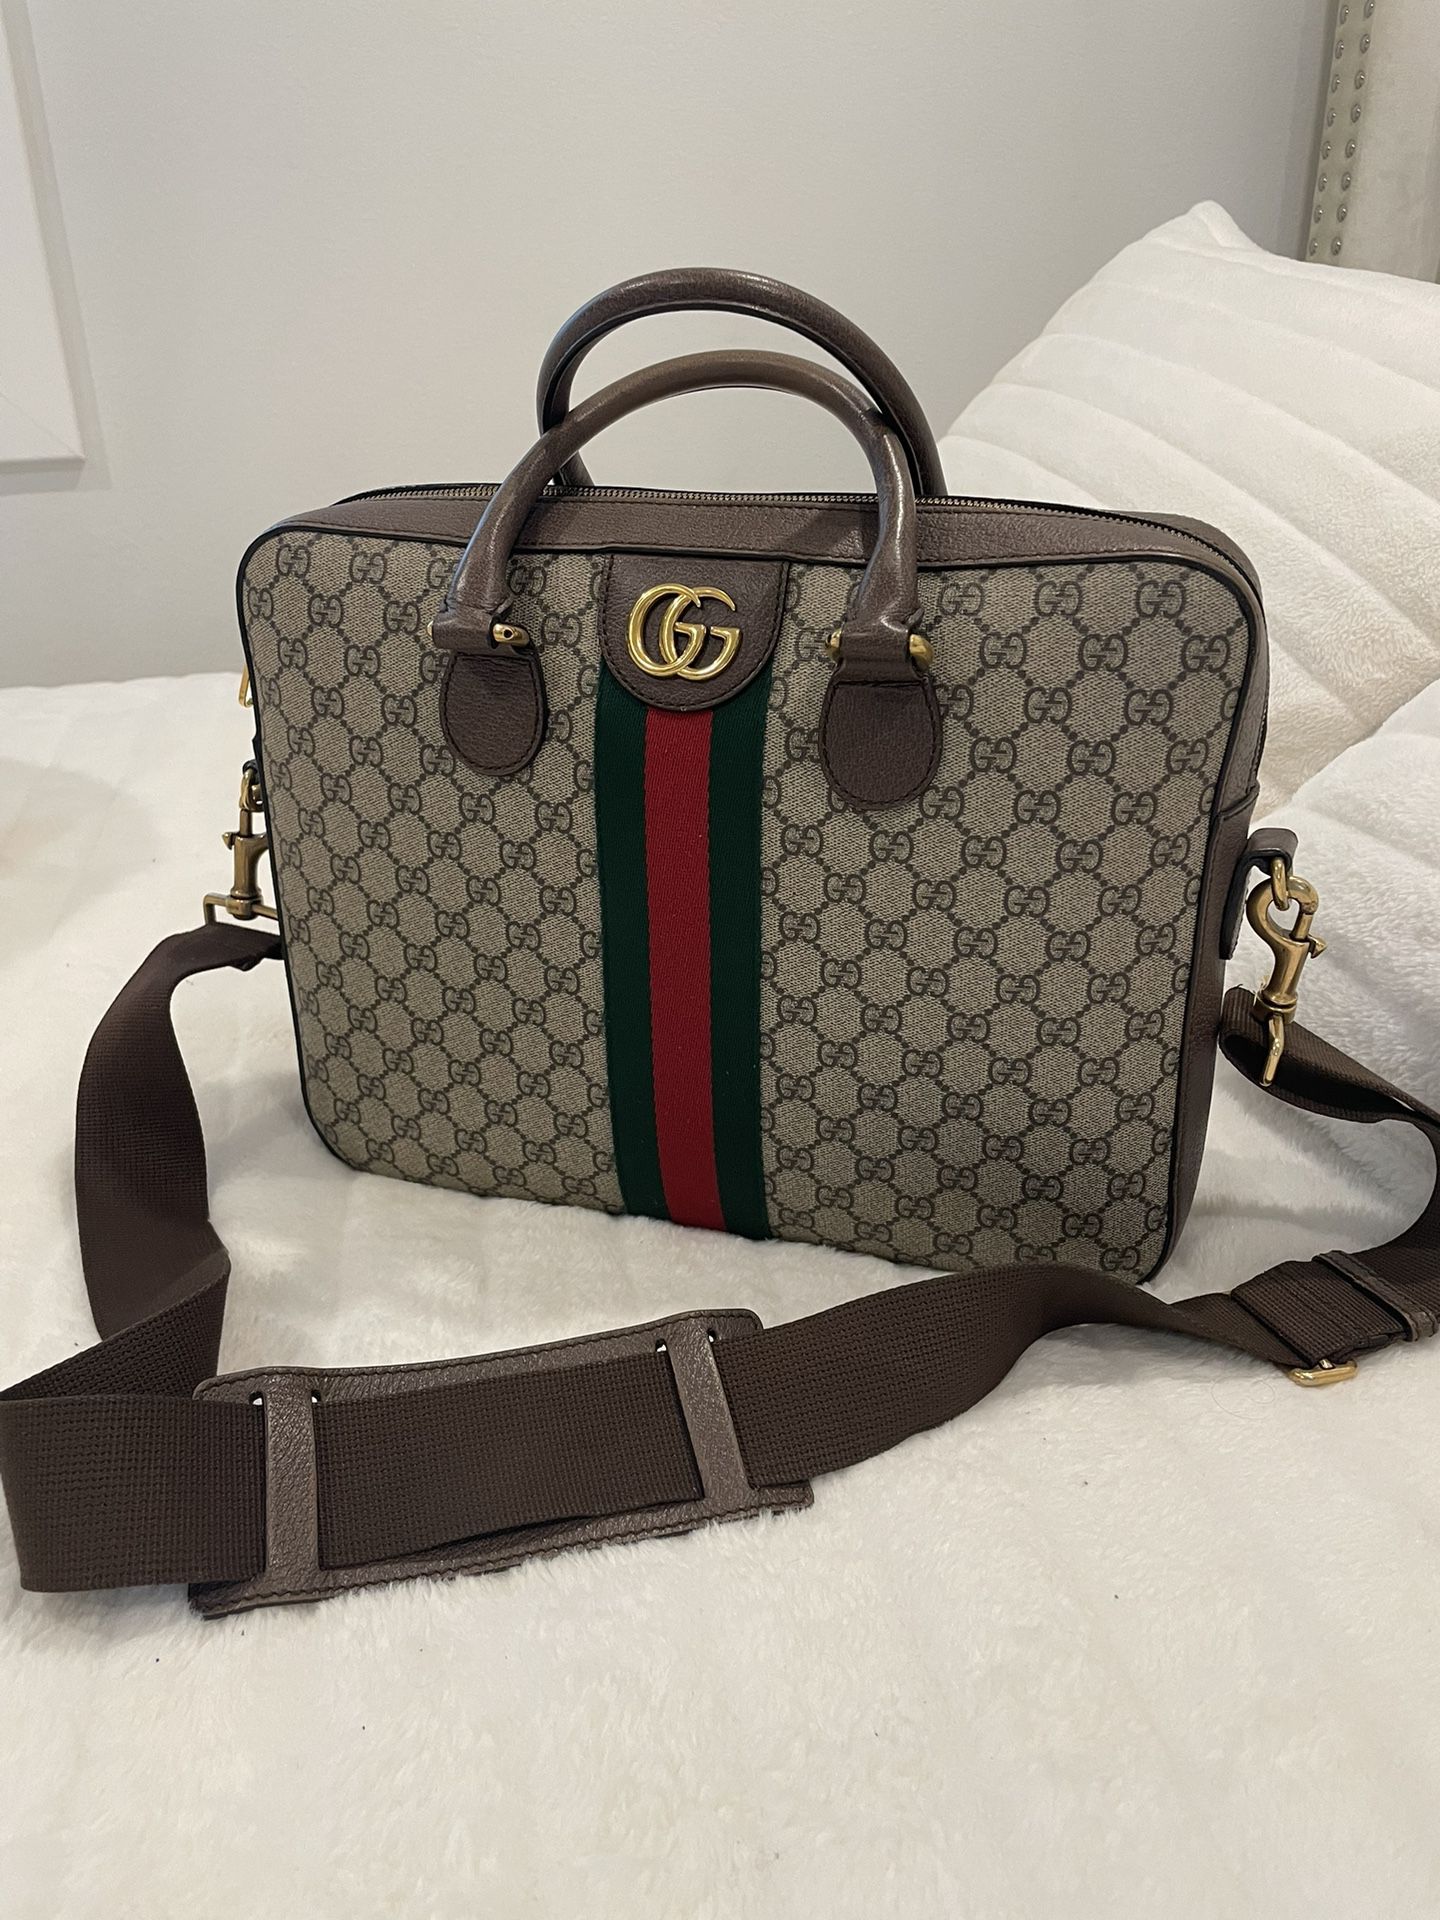 GUCCI LAPTOP BAG for Sale in Beverly Hills, CA - OfferUp